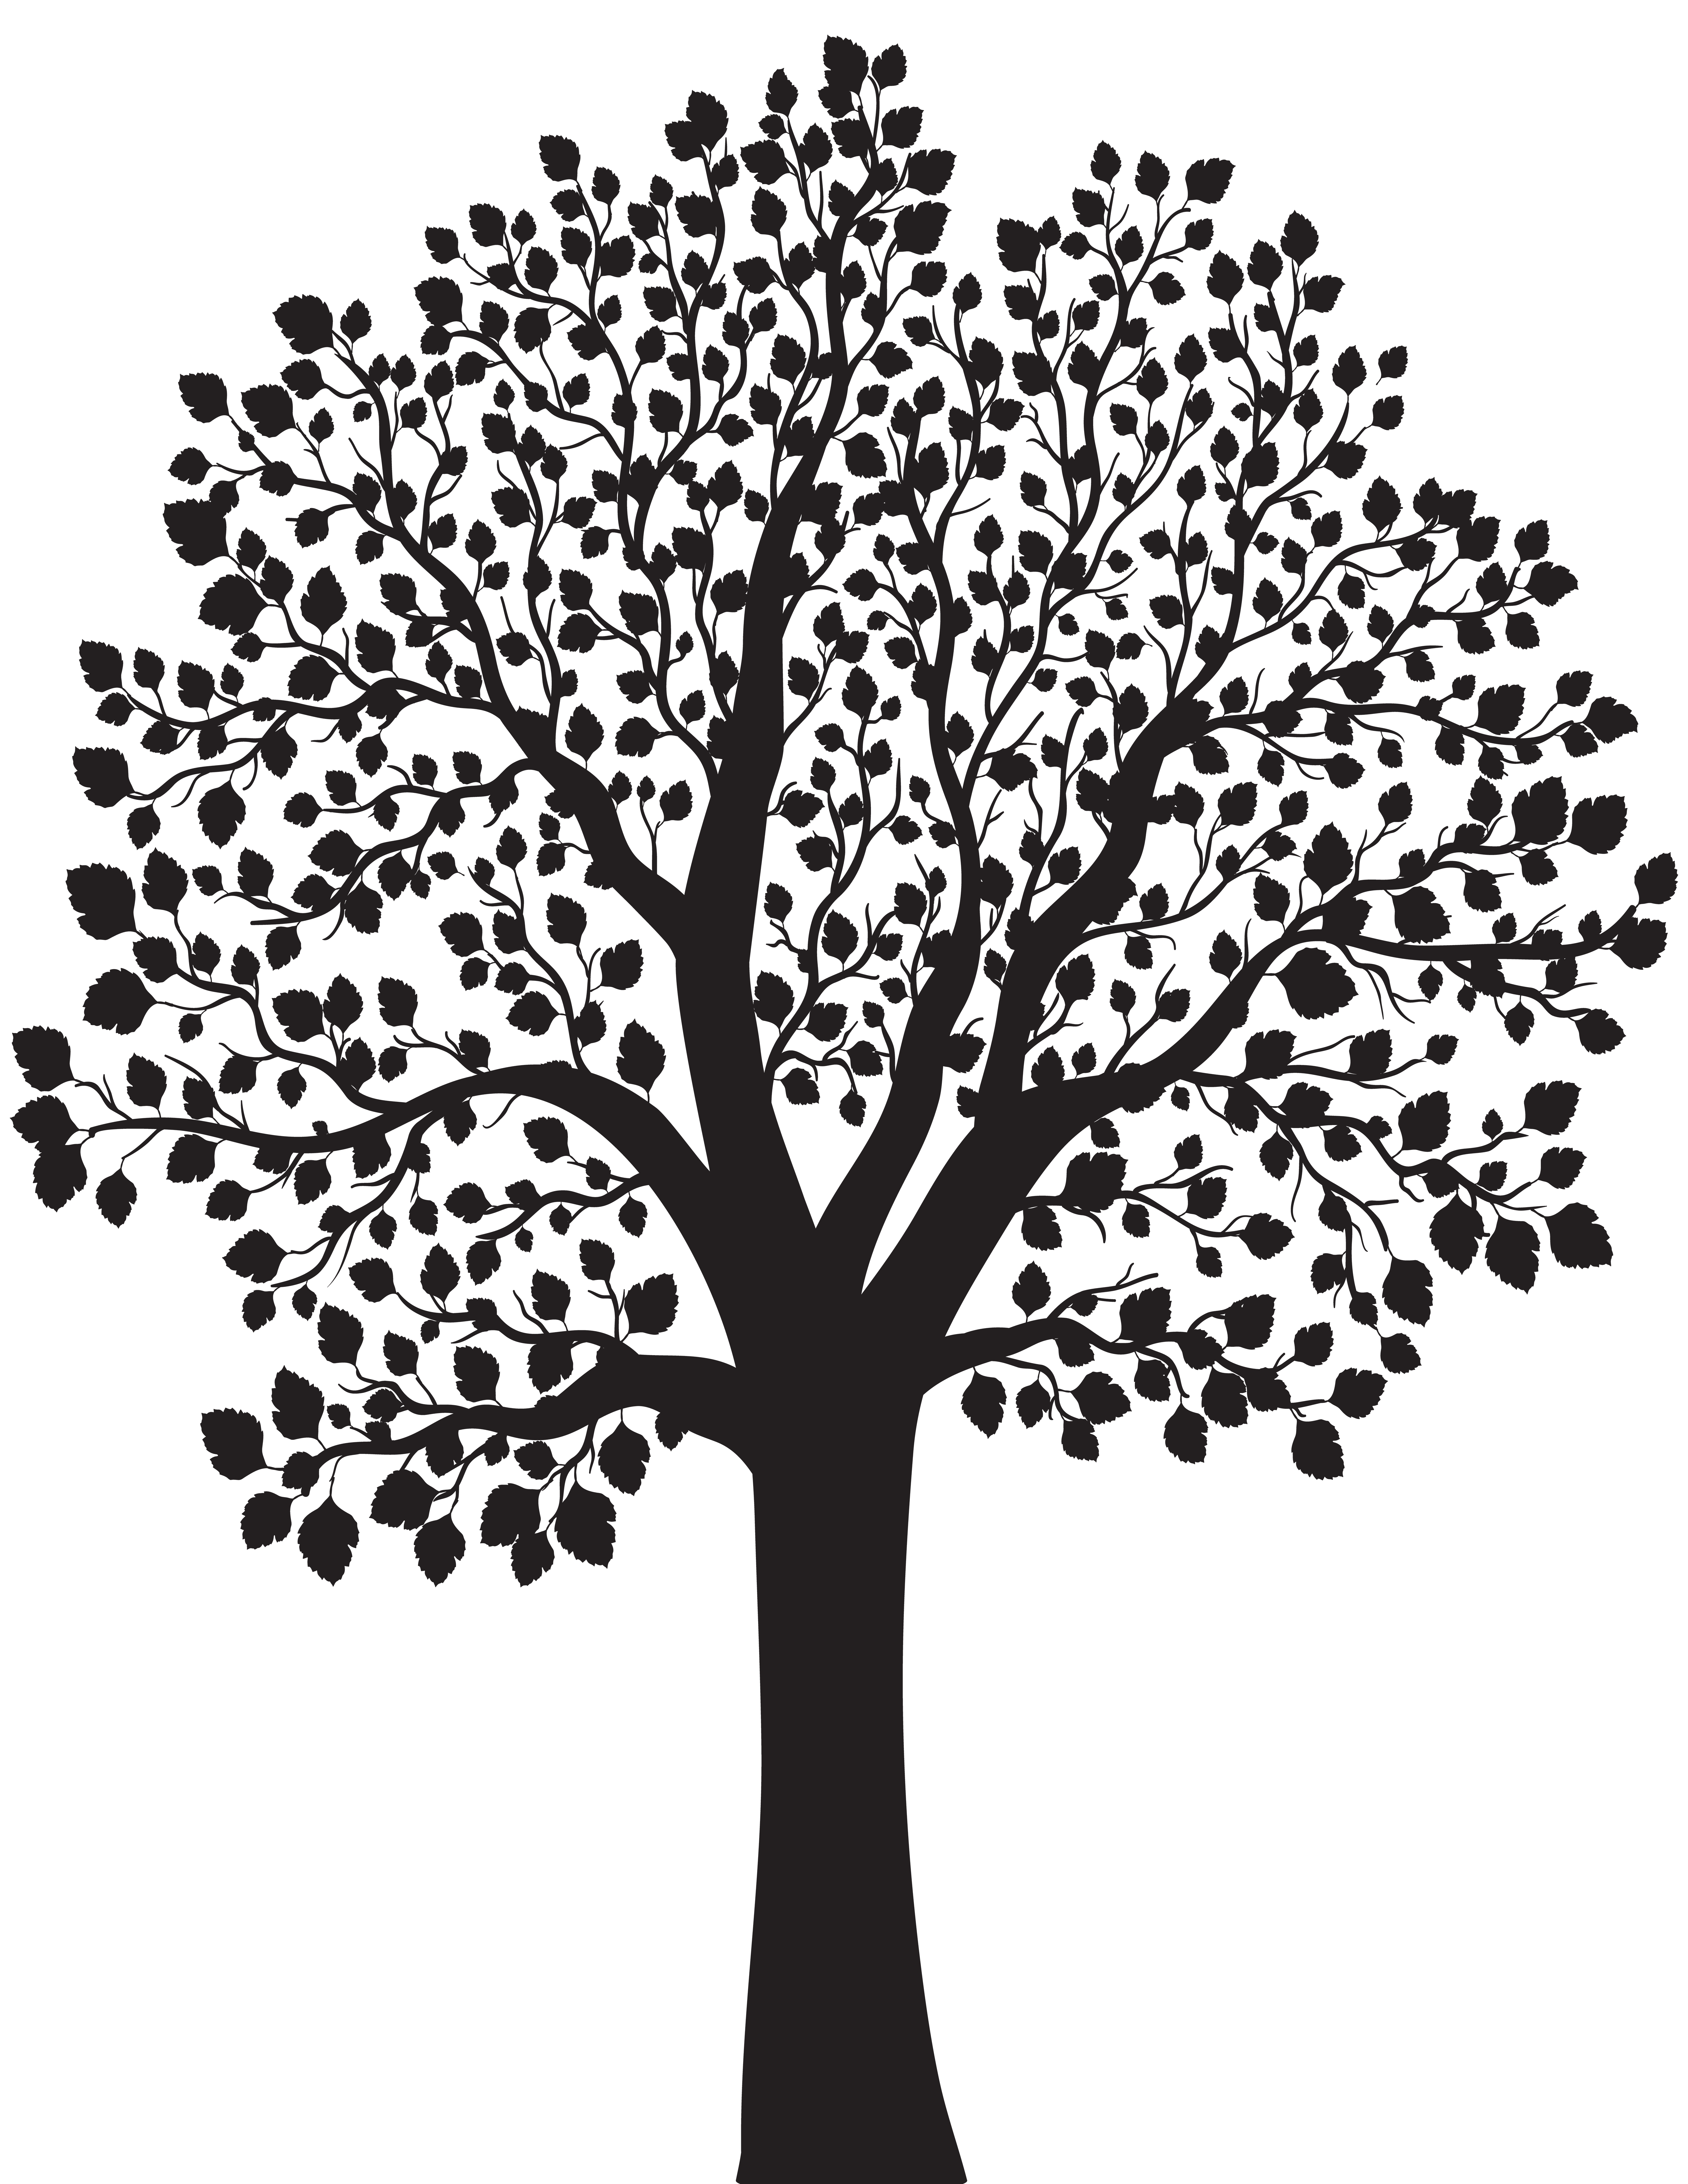 Tree Silhouette PNG Clip Art Image | Gallery Yopriceville ...